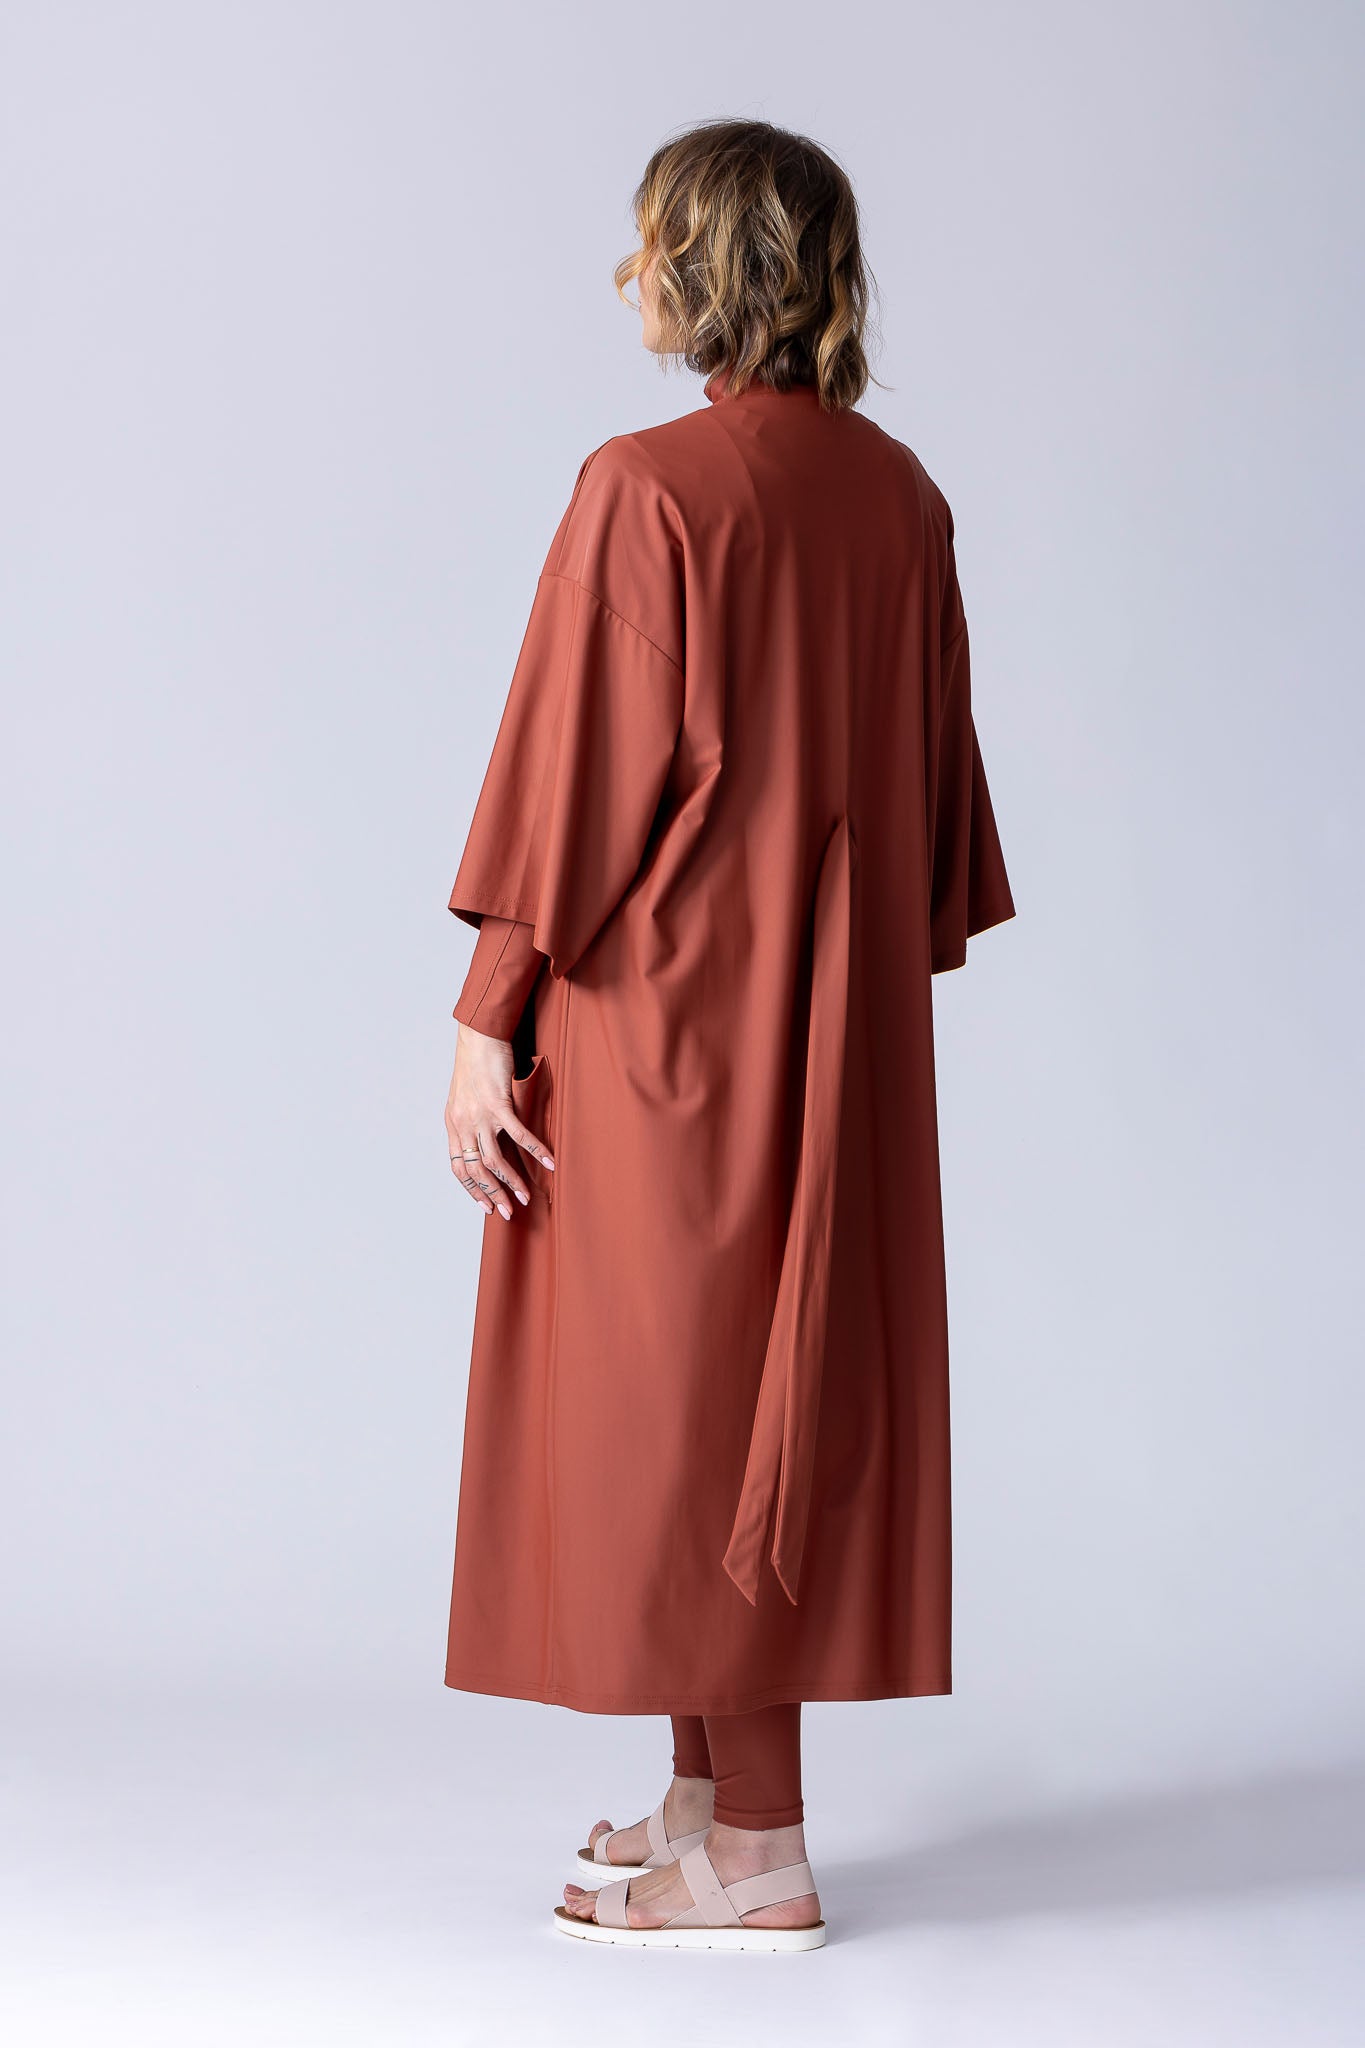 Beach Cover Up in terracotta colour maxi length with pocket, belt and made of swim fabric.